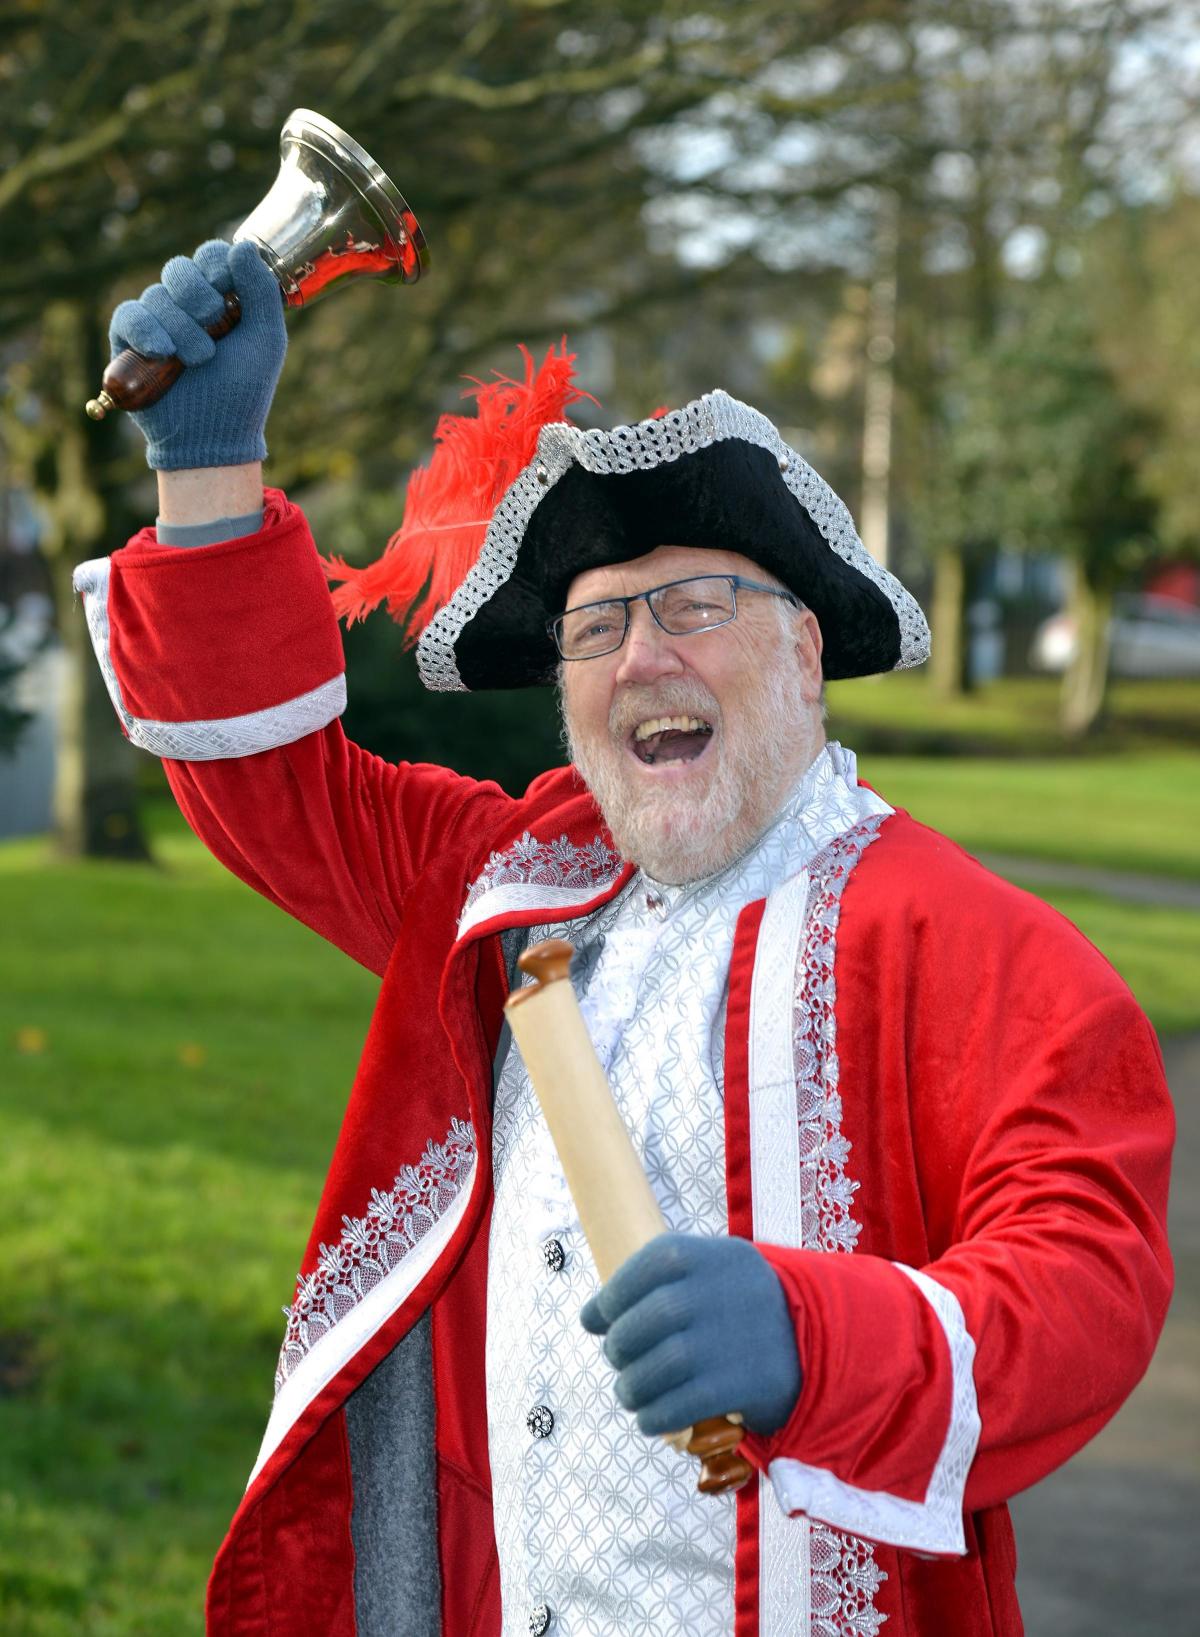 Gerry Drapier heralds in the Dickensian Market at Clayton